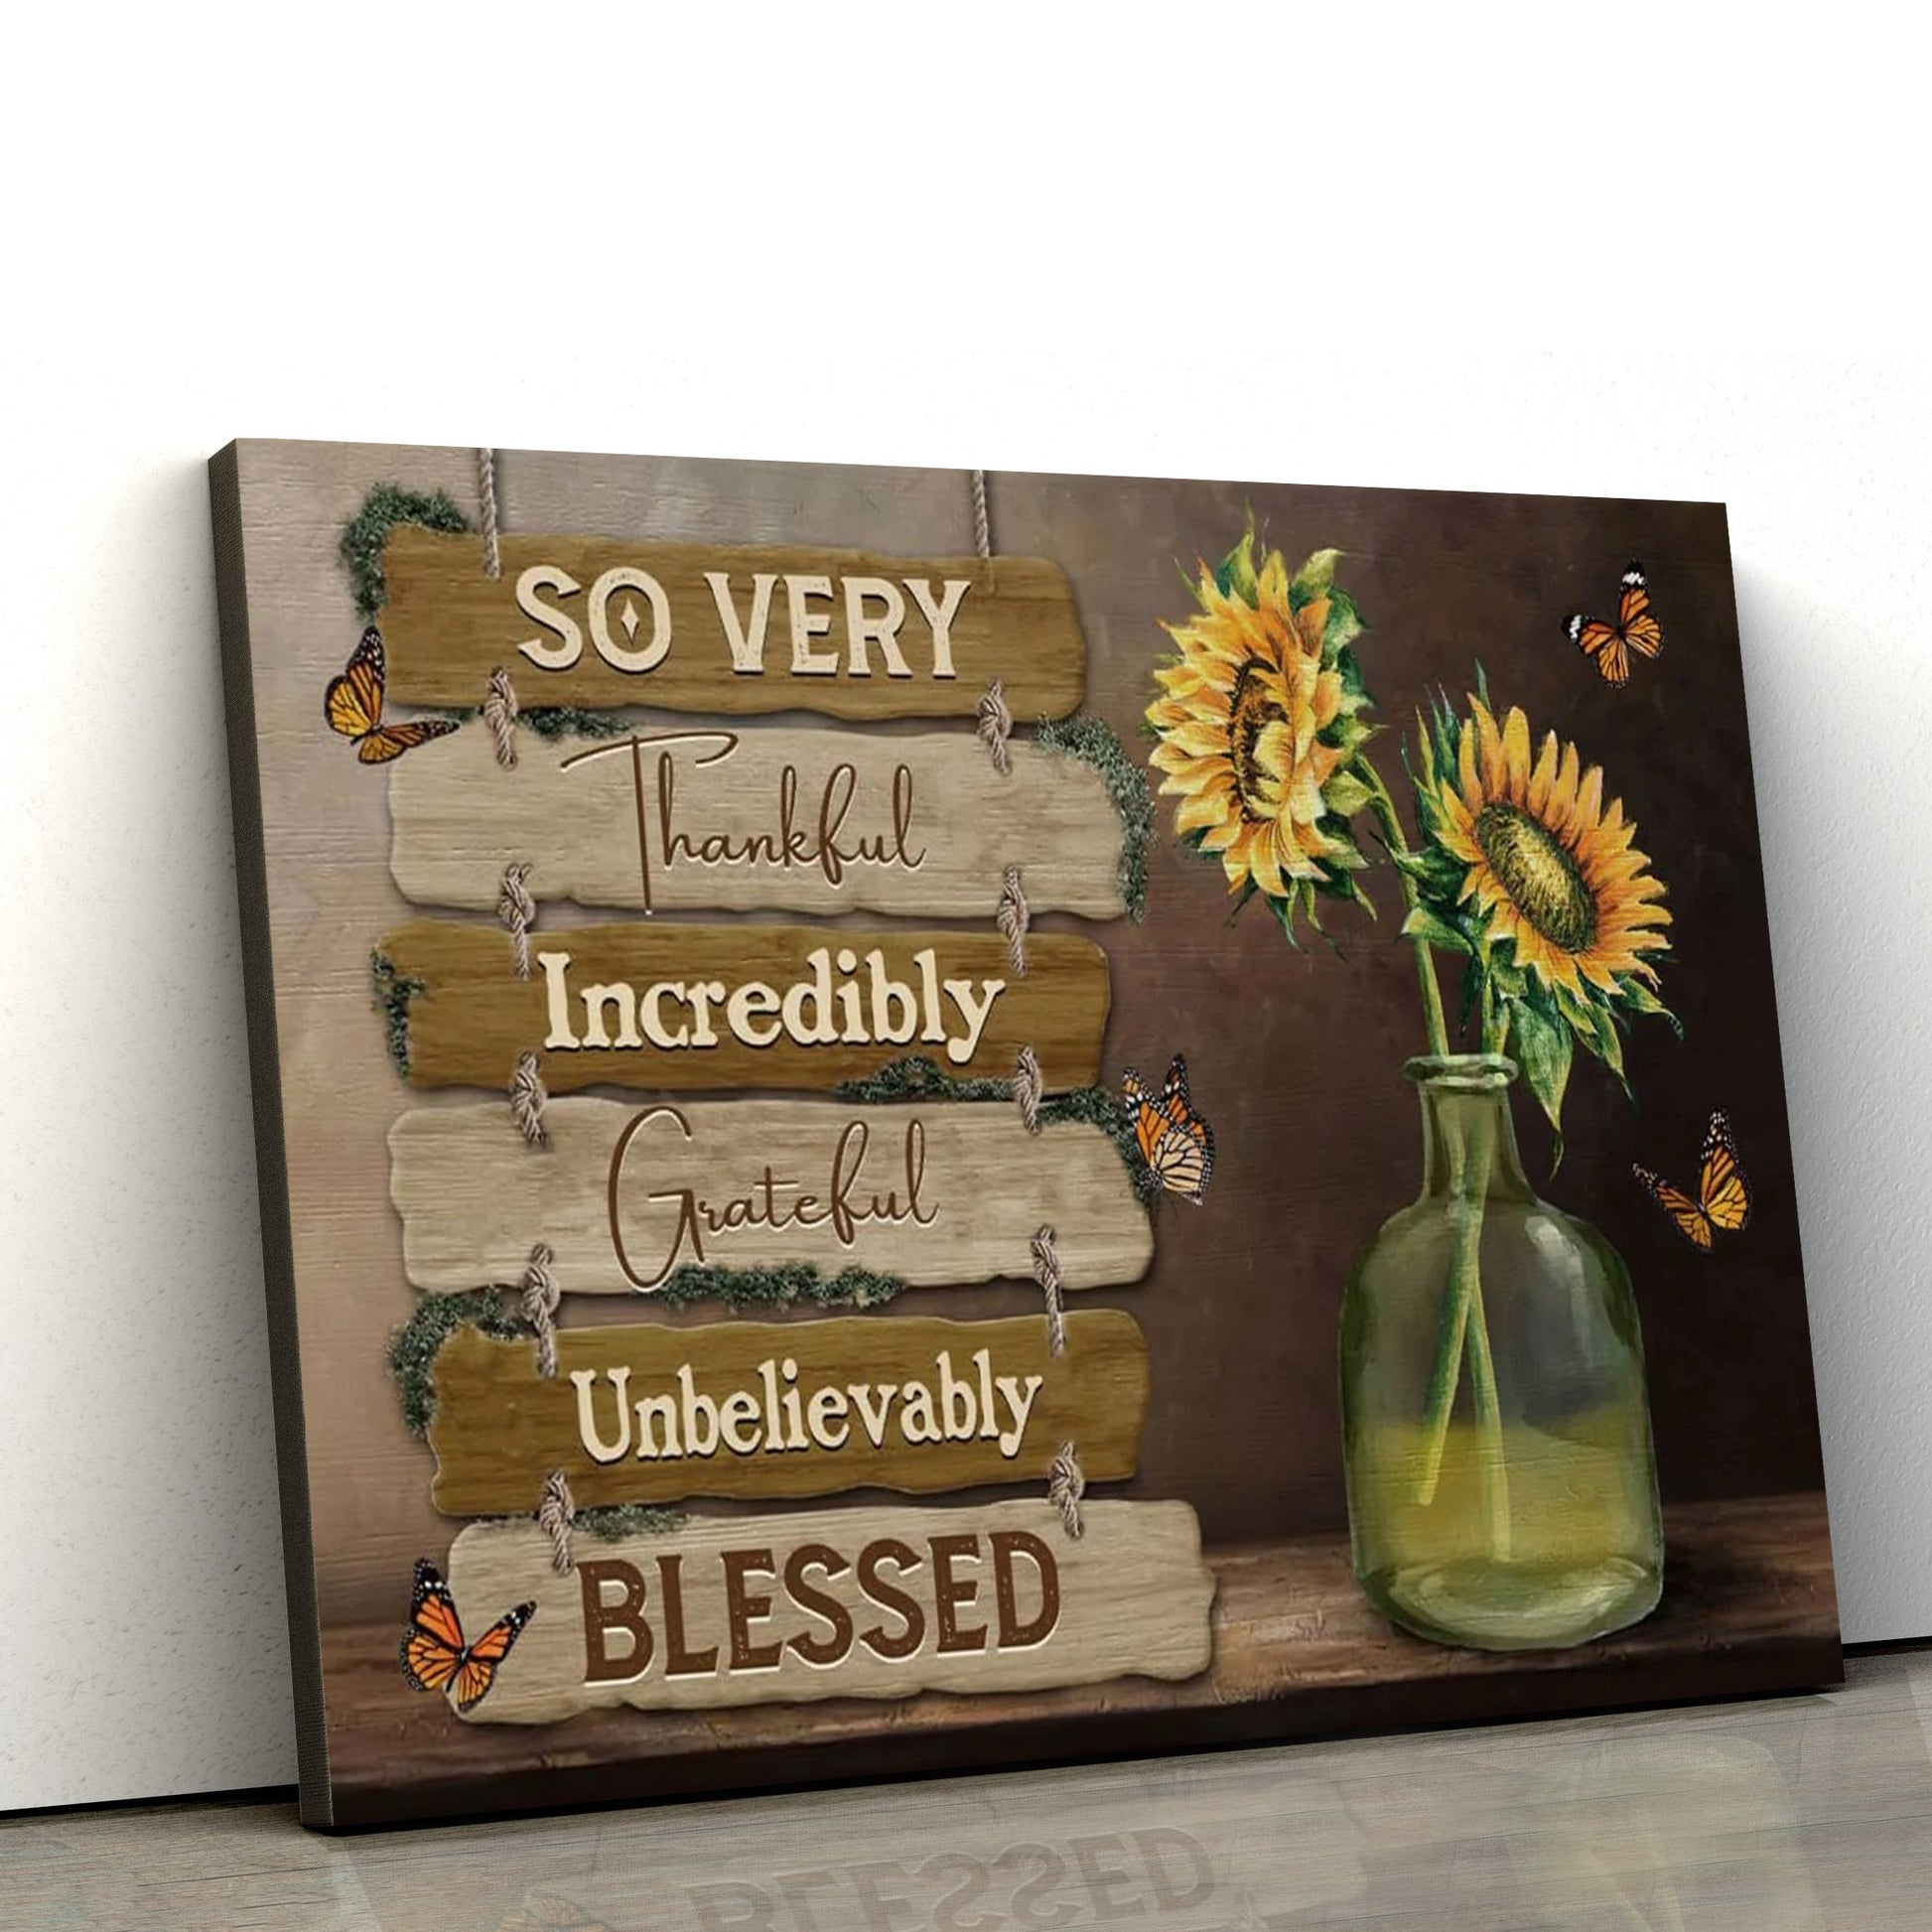 So Very Thankful Incredibly Grateful Unbelievably Blessed Wall Art Canvas Christian Decor